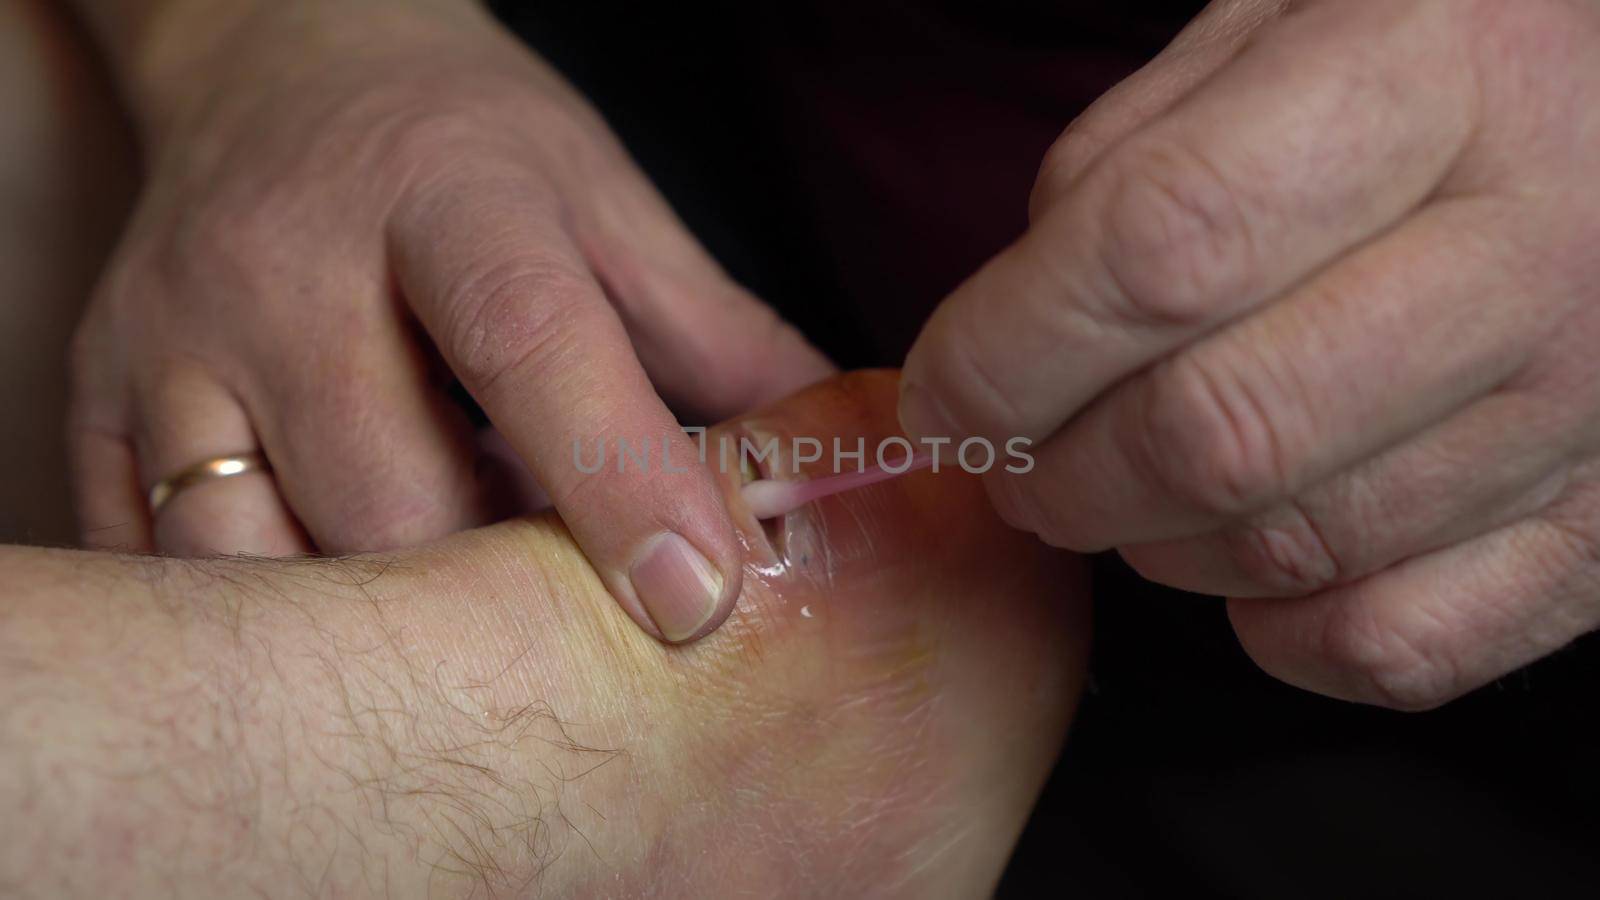 Wound treatment from suppuration with a cotton swab. Surgical incision of the ankle joint for inflammation. 4k